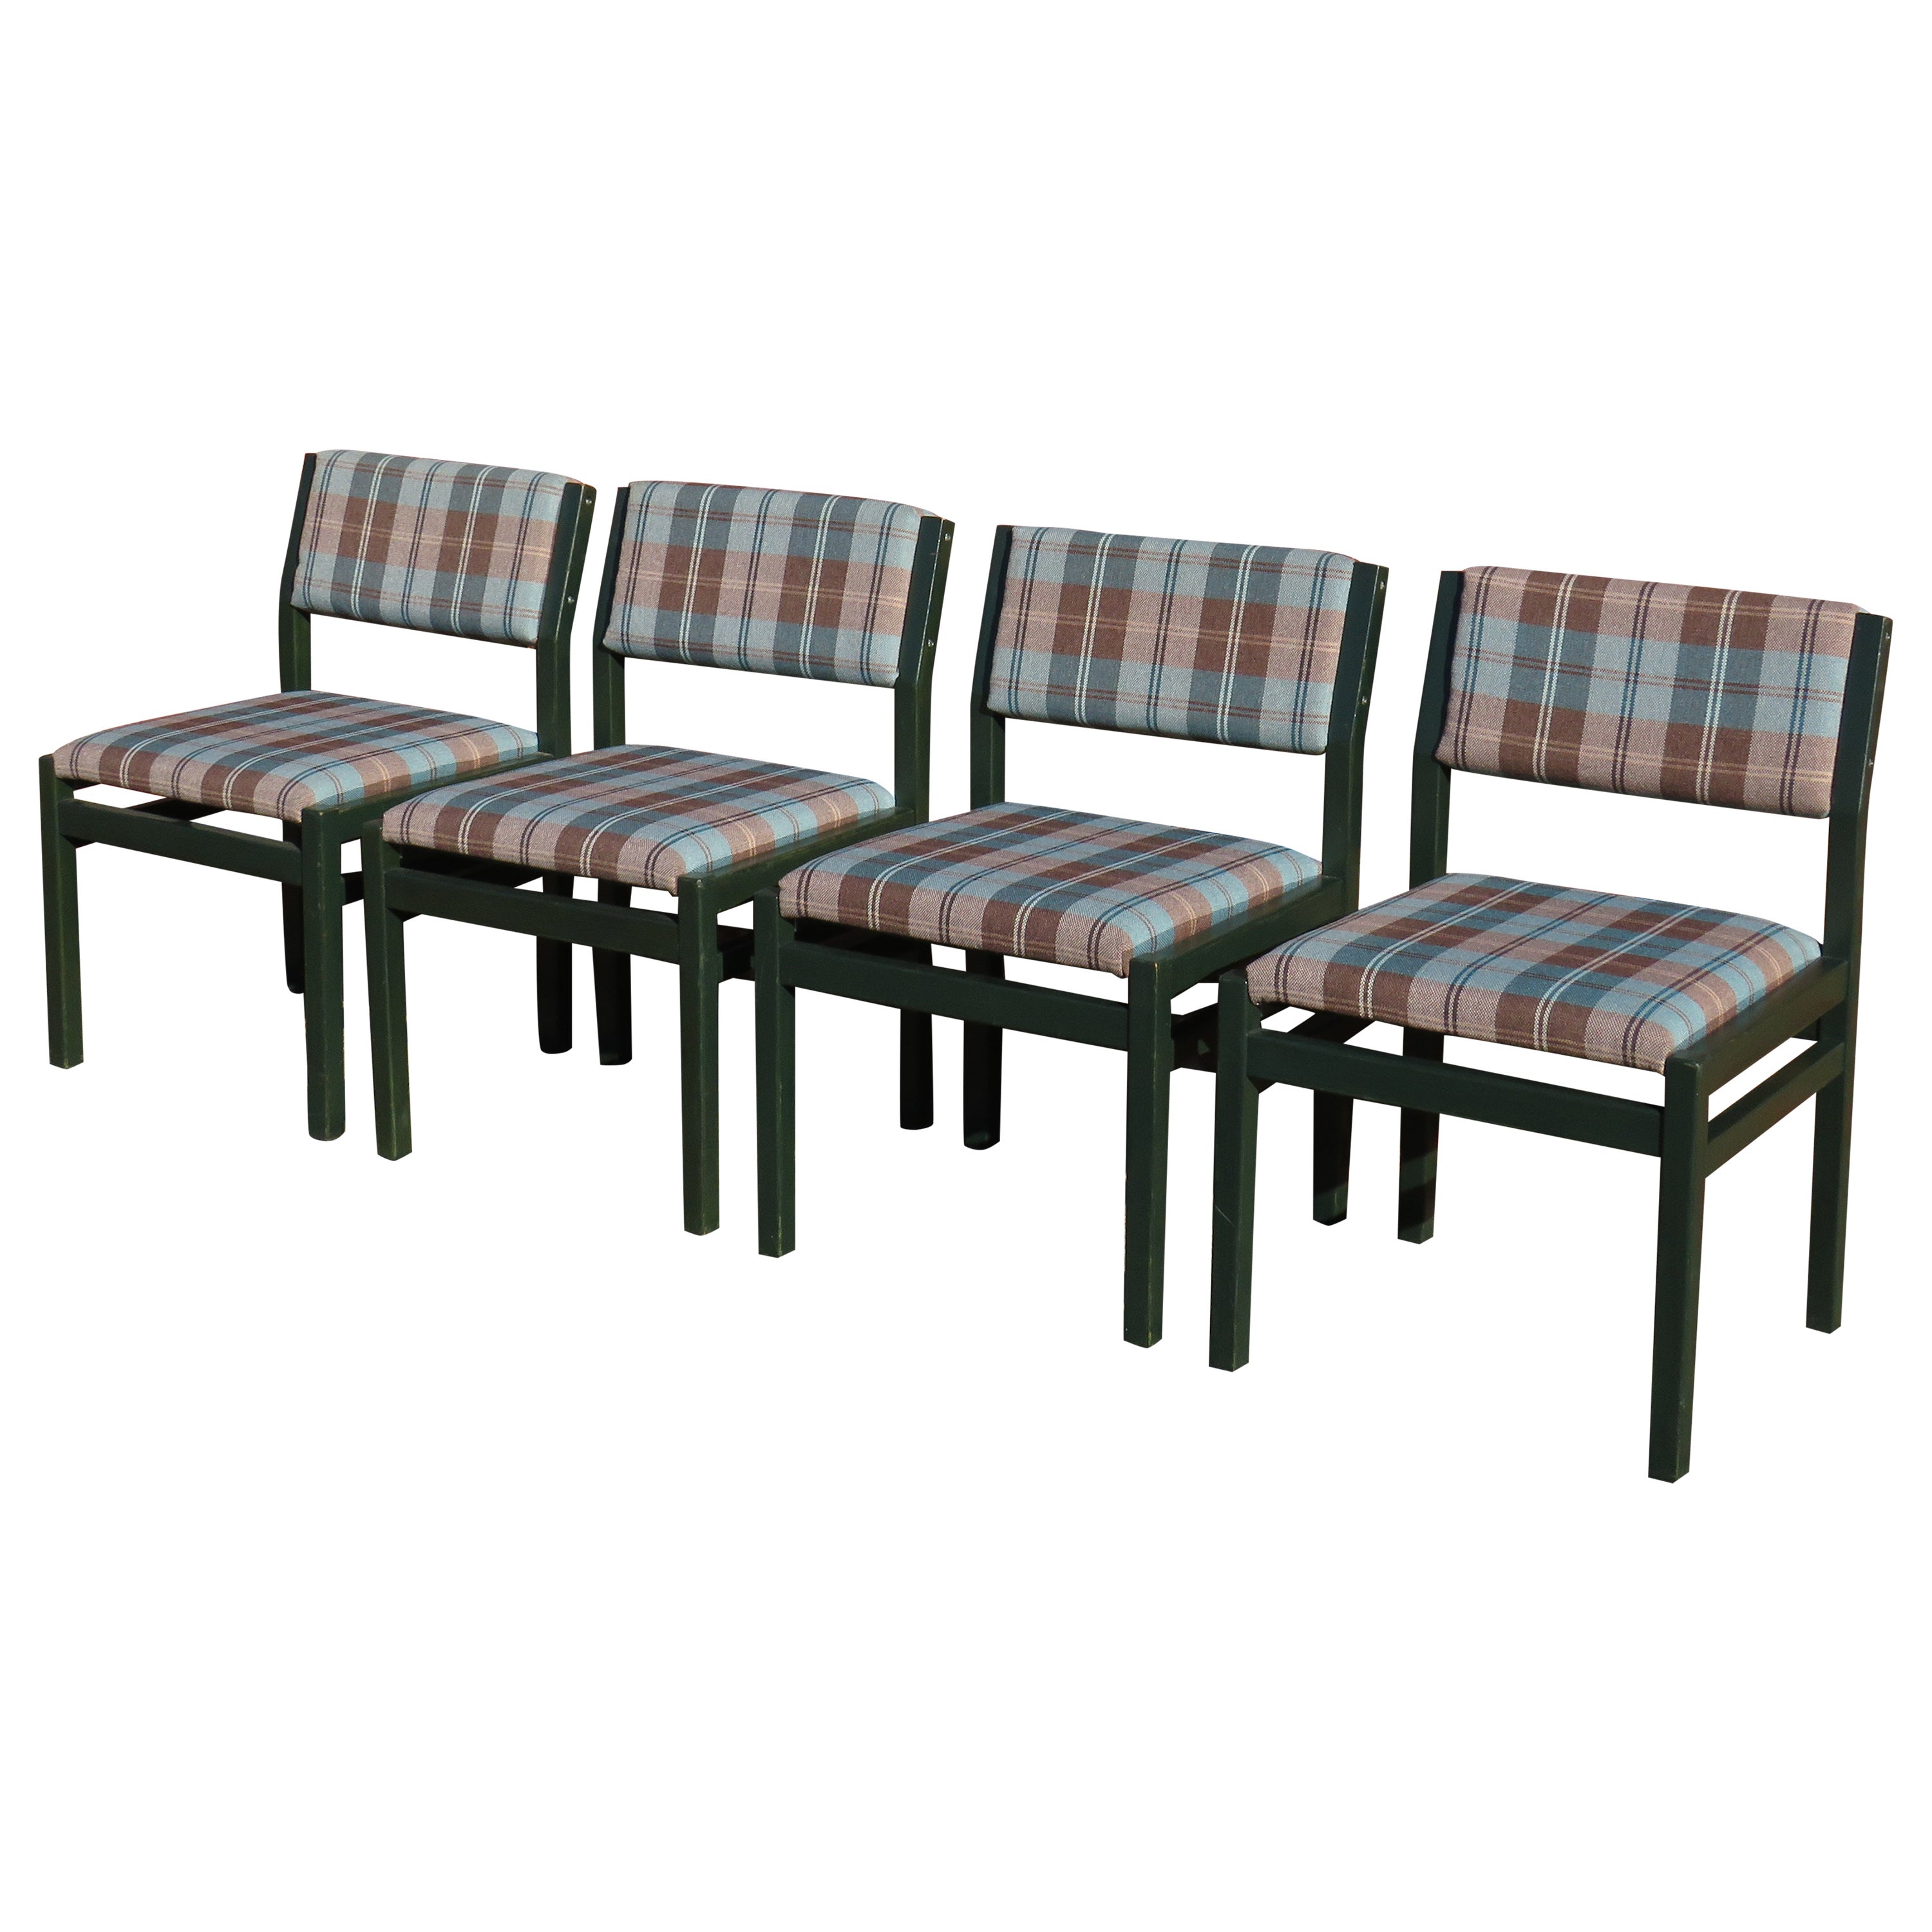 Set of 4 Sa 07 Chairs by Cees Braakman for Pastoe, 1960 For Sale